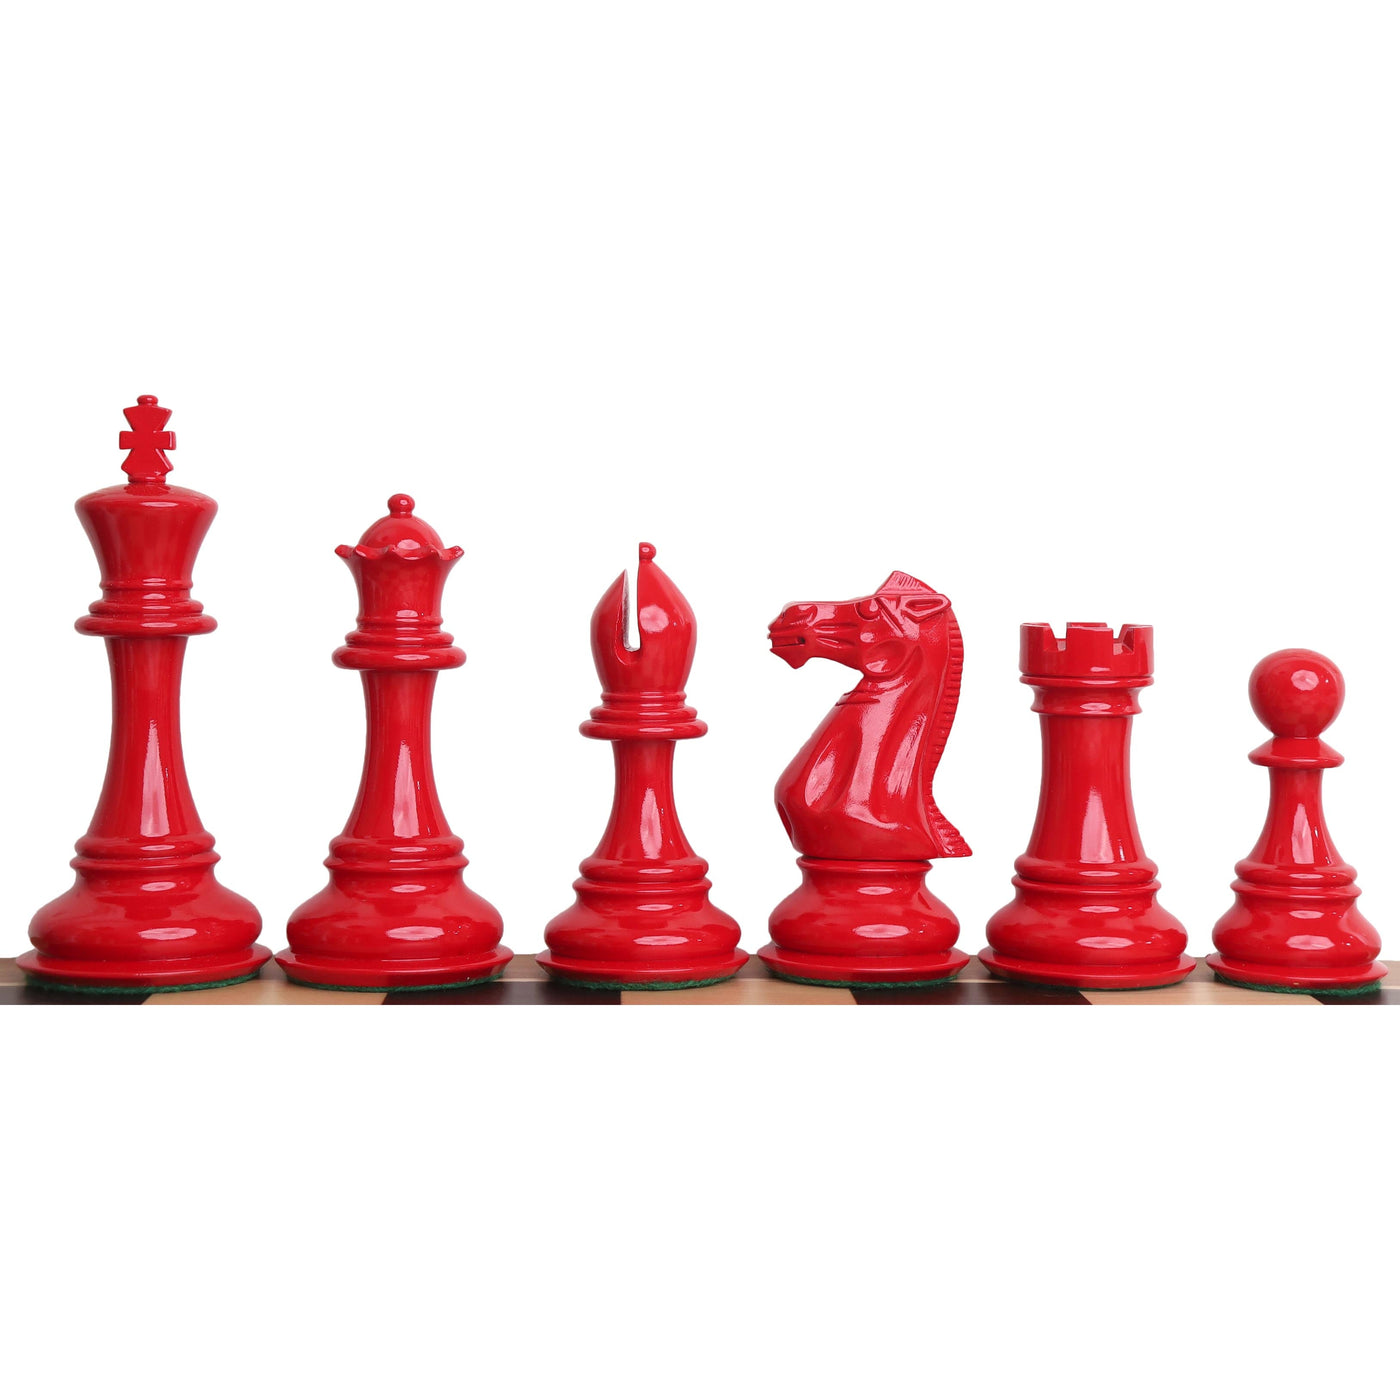 6.3" Jumbo Pro Staunton Luxury Chess Set - Chess Pieces Only - Red & White Lacquered